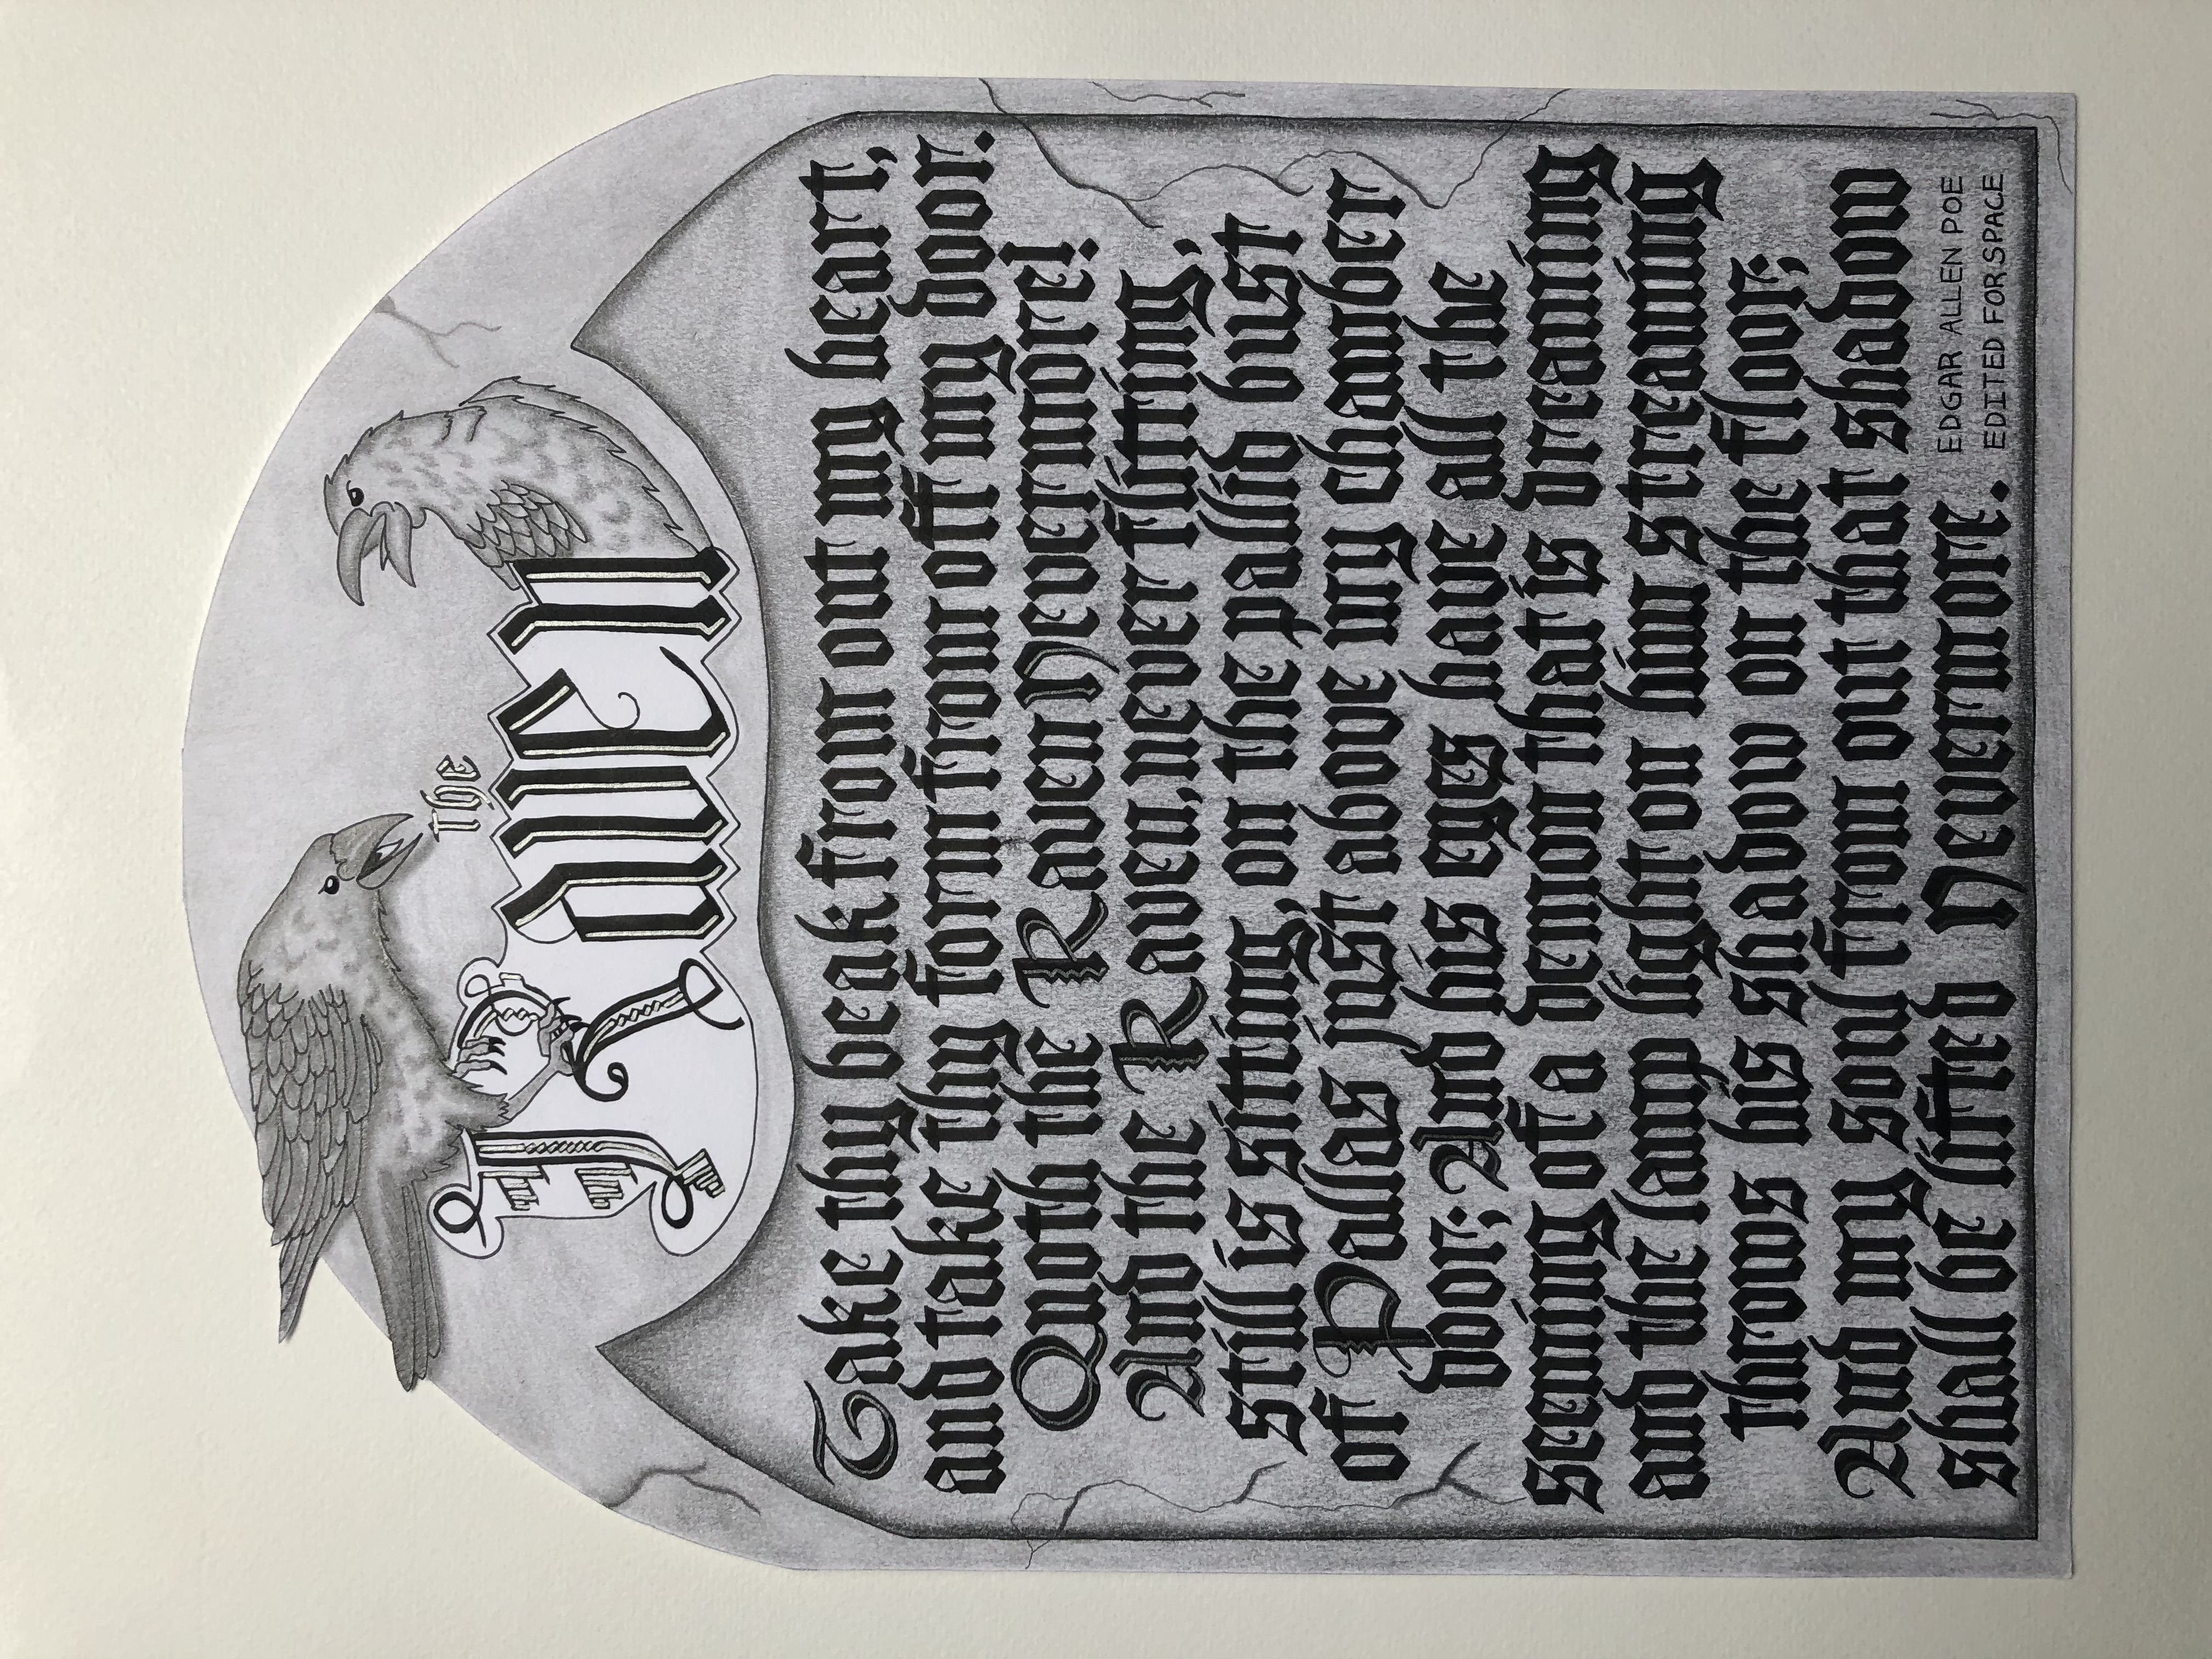 A calligraphy and text-based art project